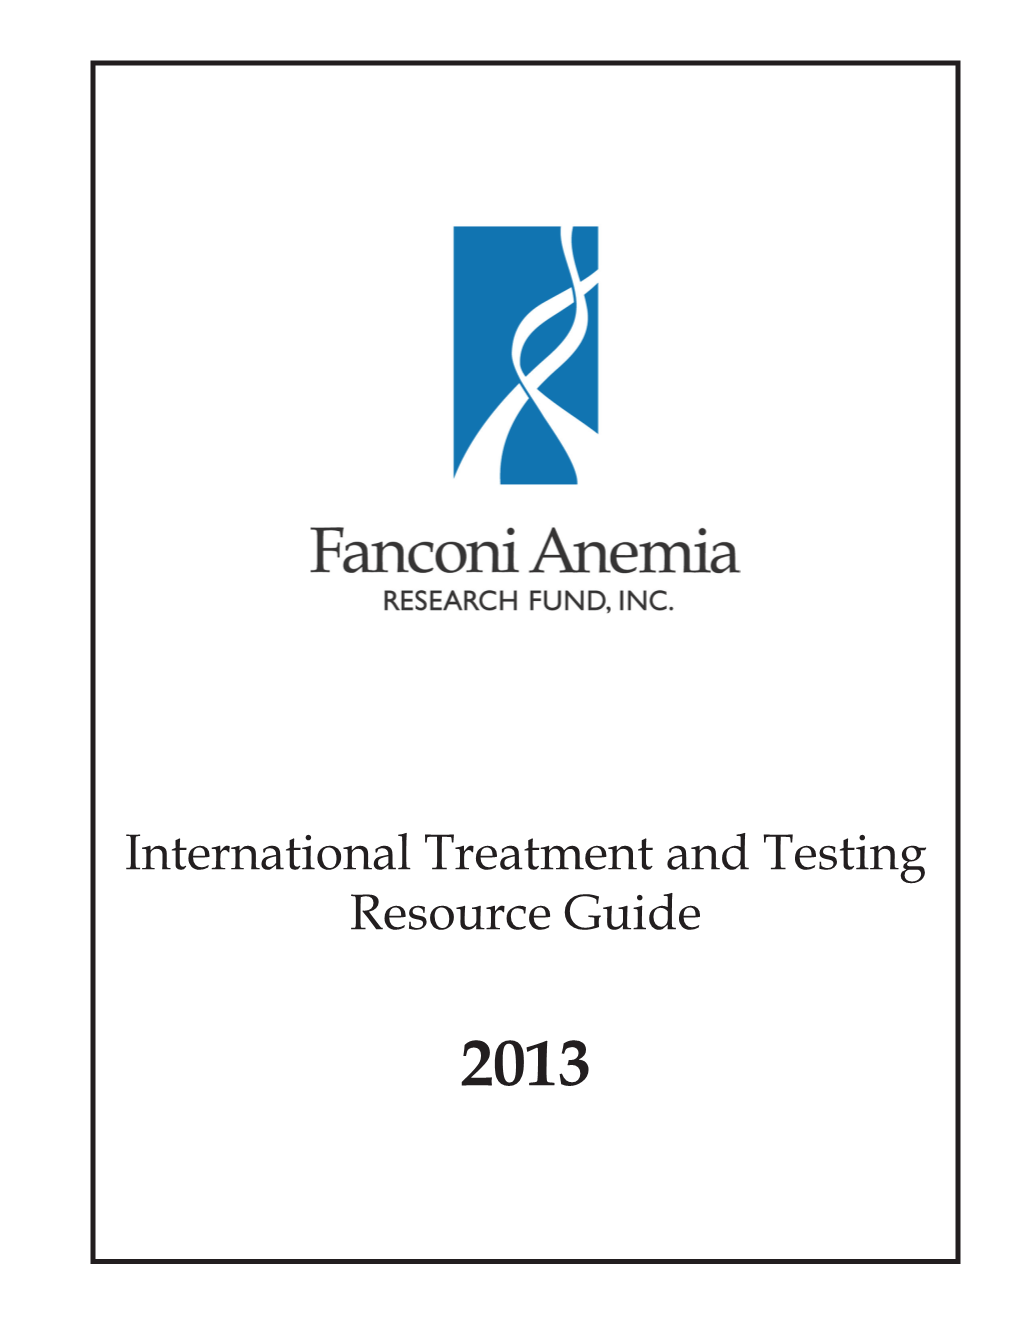 International Treatment and Testing Resource Guide